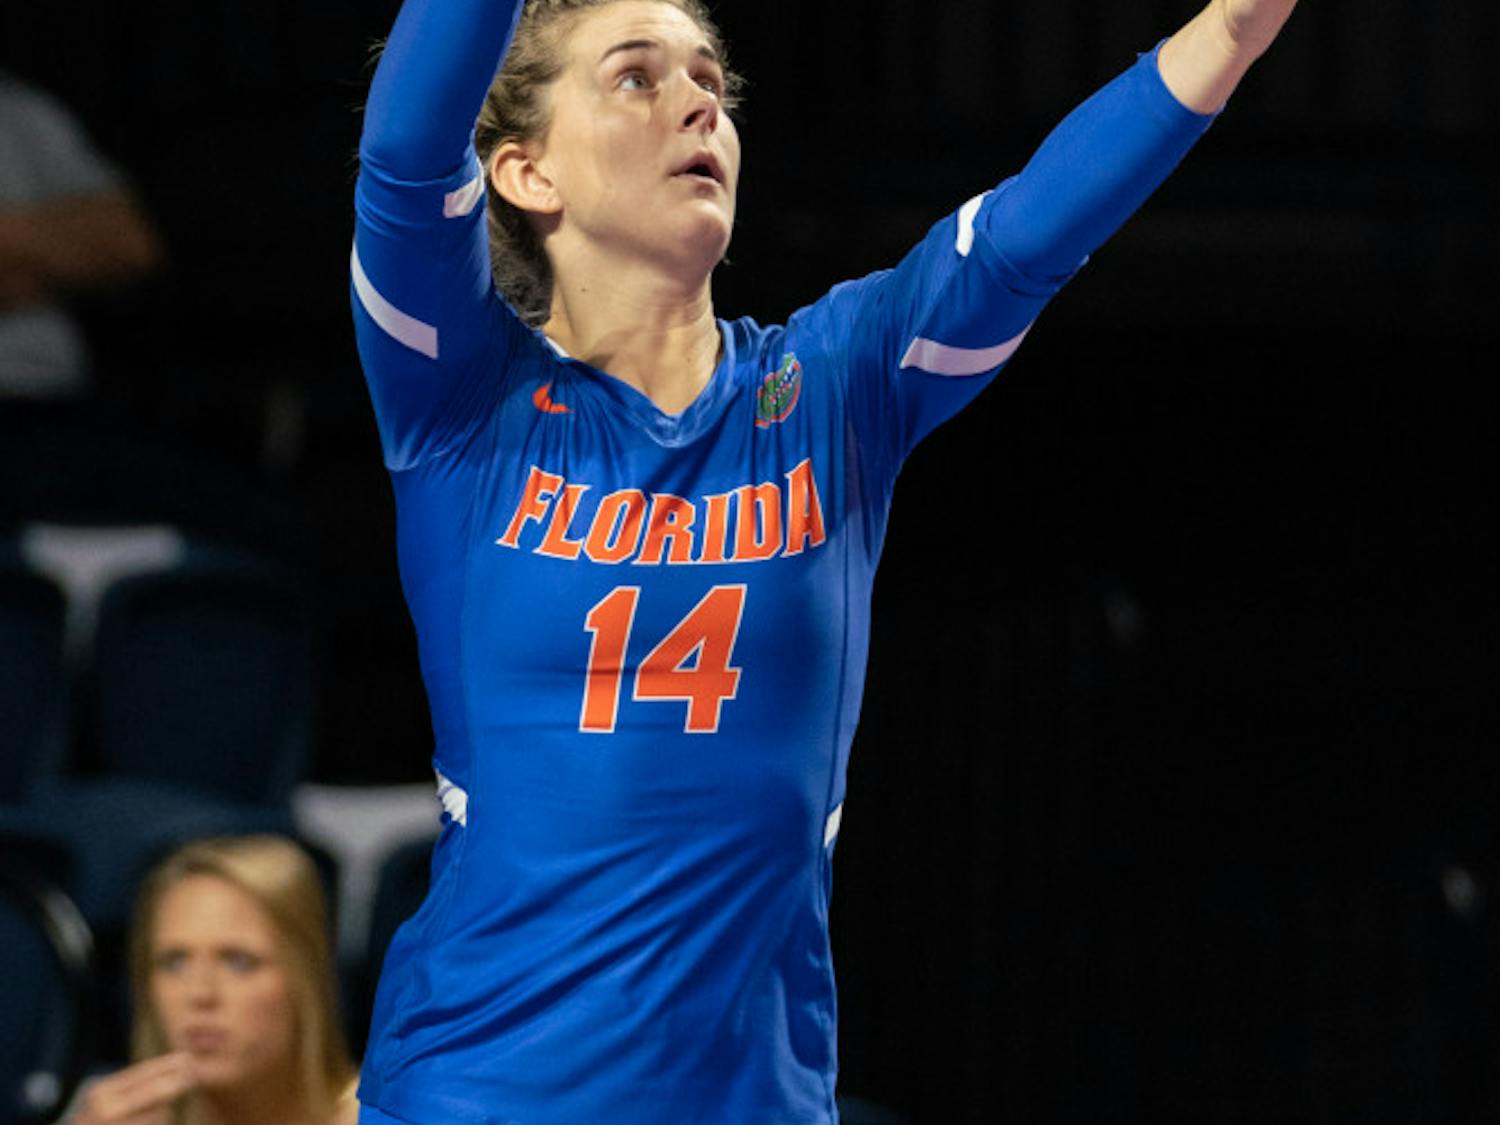 Libero Allie Gregory helped spark an 8-0 Florida run with two service aces in the third and final set of the Gators' sweep of Ole Miss Friday night.